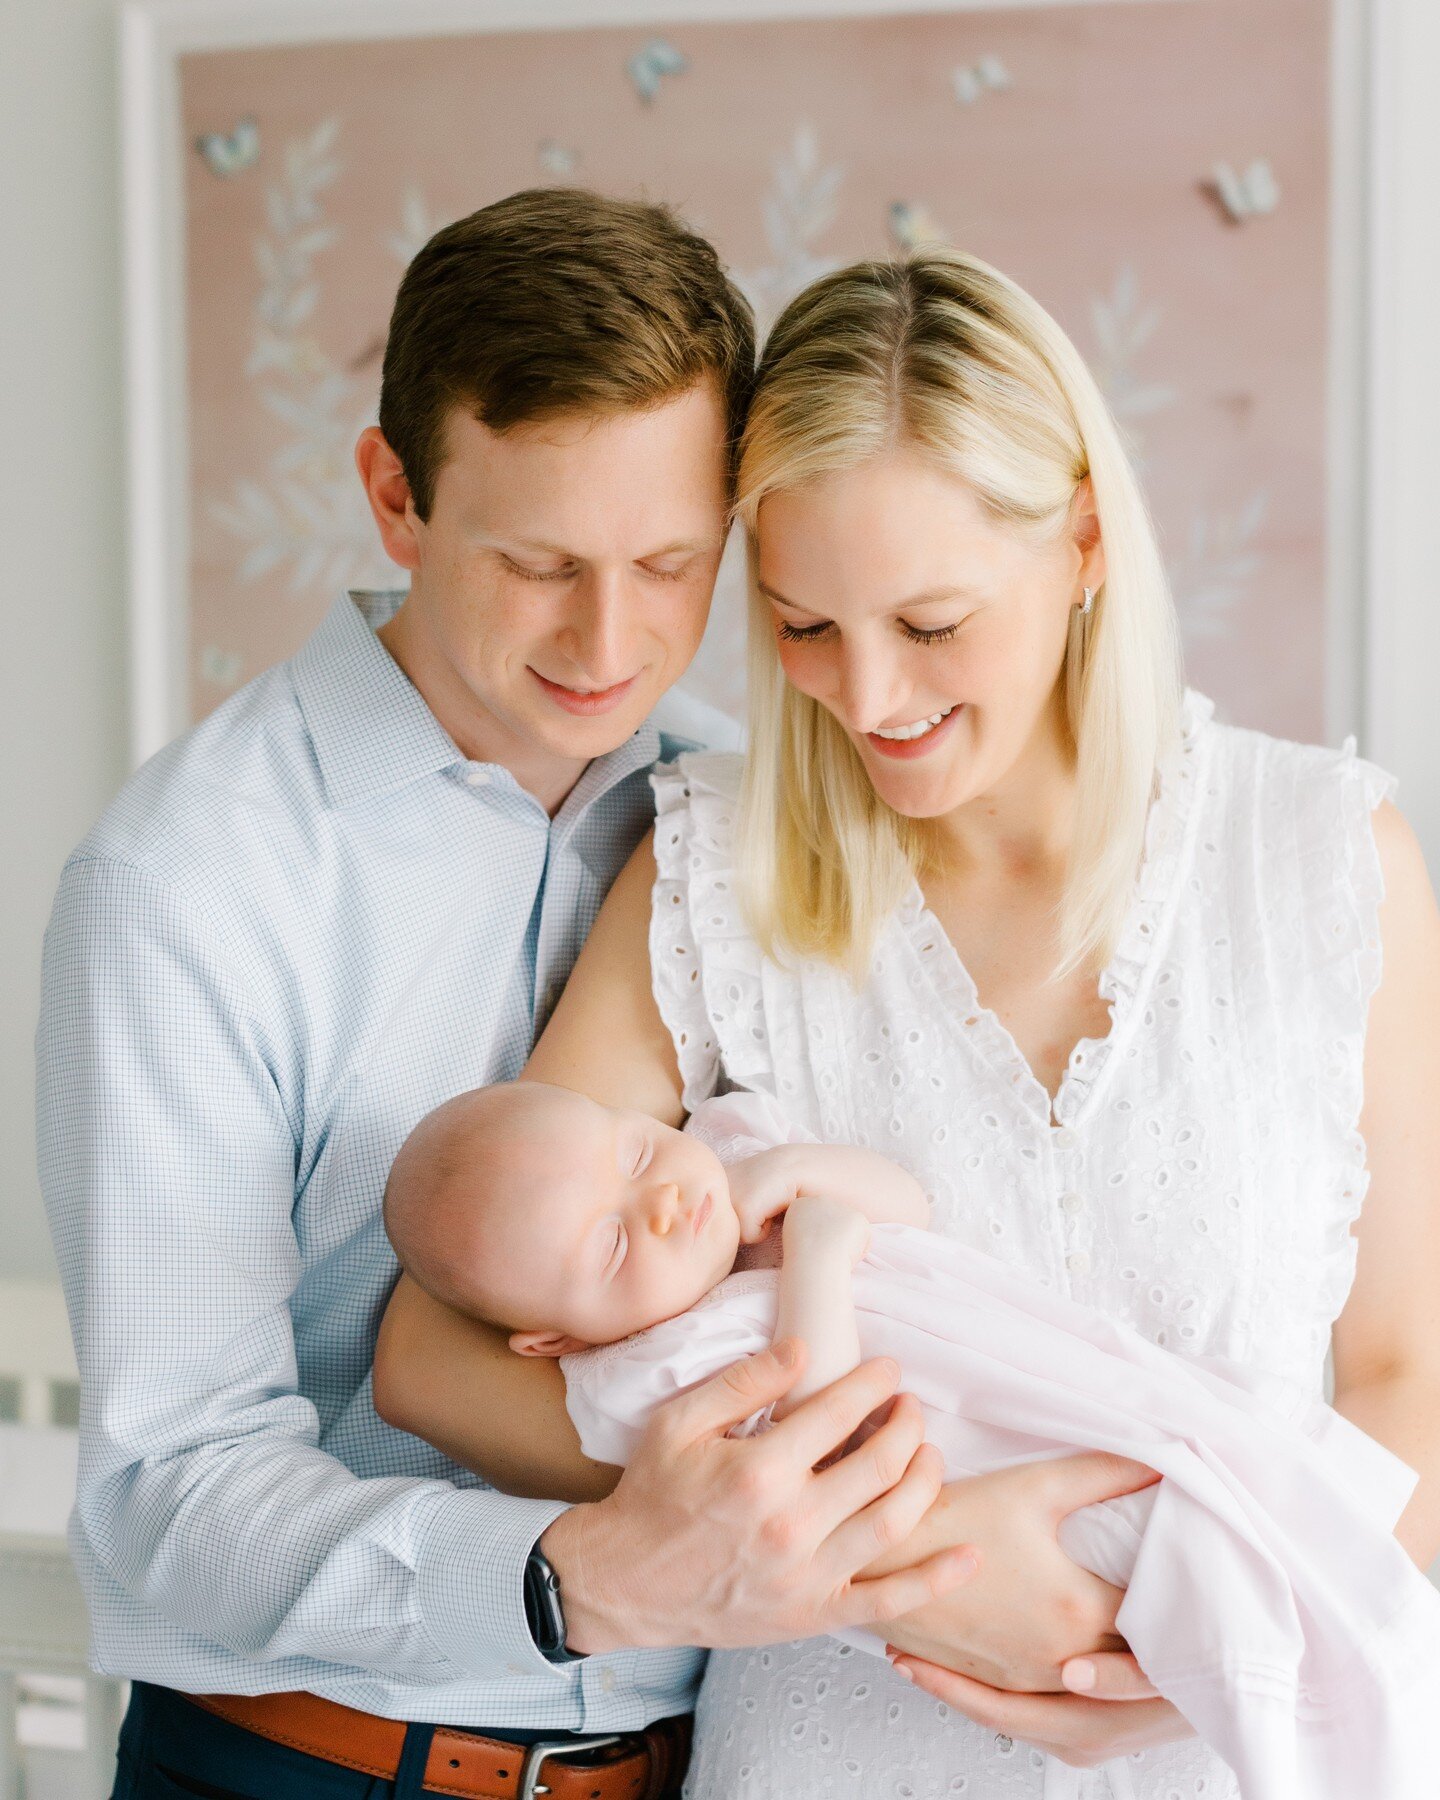 The sweetest new family of three 💗

At-home lifestyle newborn session | Houston, Texas